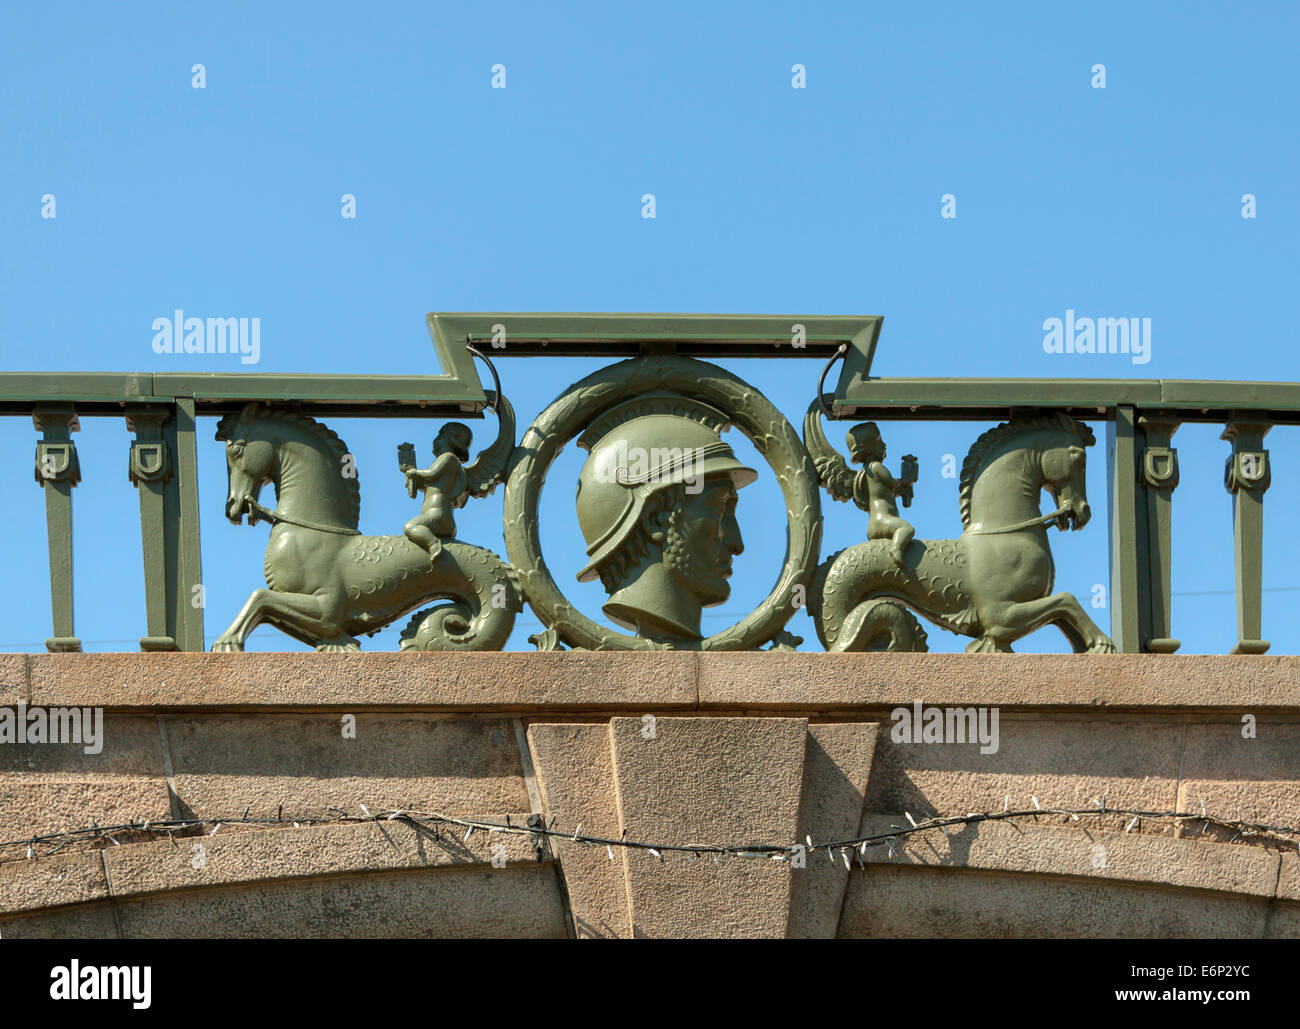 Detail of Kämpebron, a bridge with a decorated balustrade, one of the oldest bridges in Göteborg, Sweden. Stock Photo